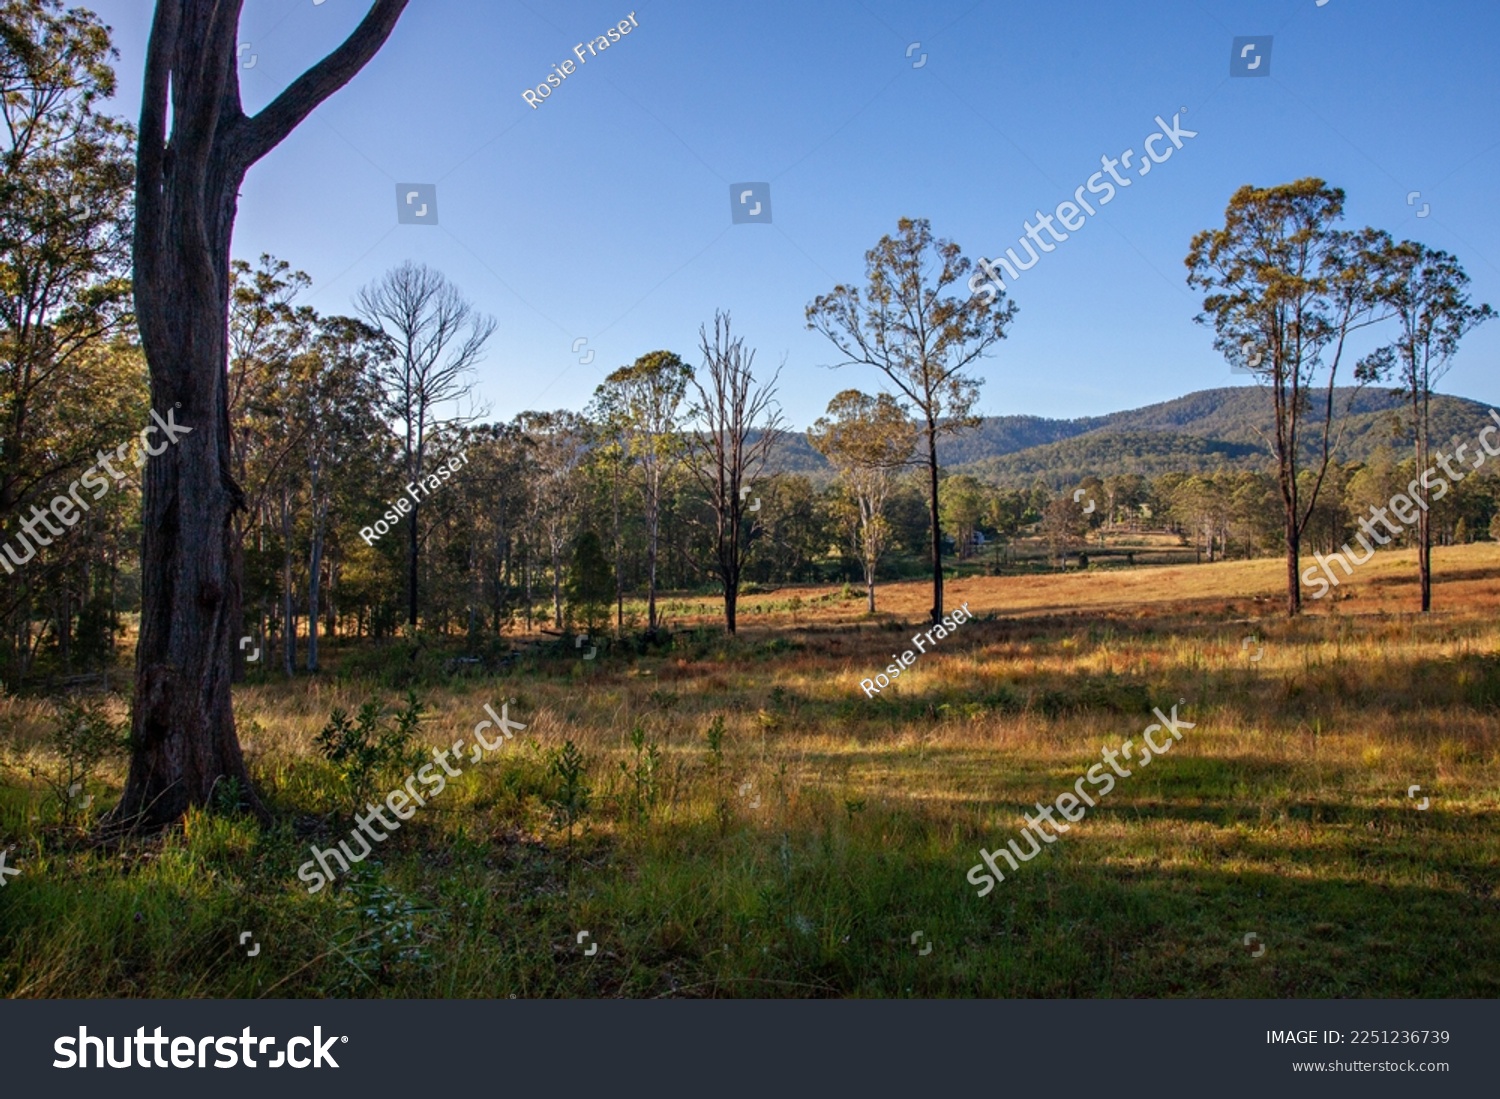 A photo of the countryside taken early one morning in rural New South Wales, Australia, showing tall gum trees and distant hills.   #2251236739